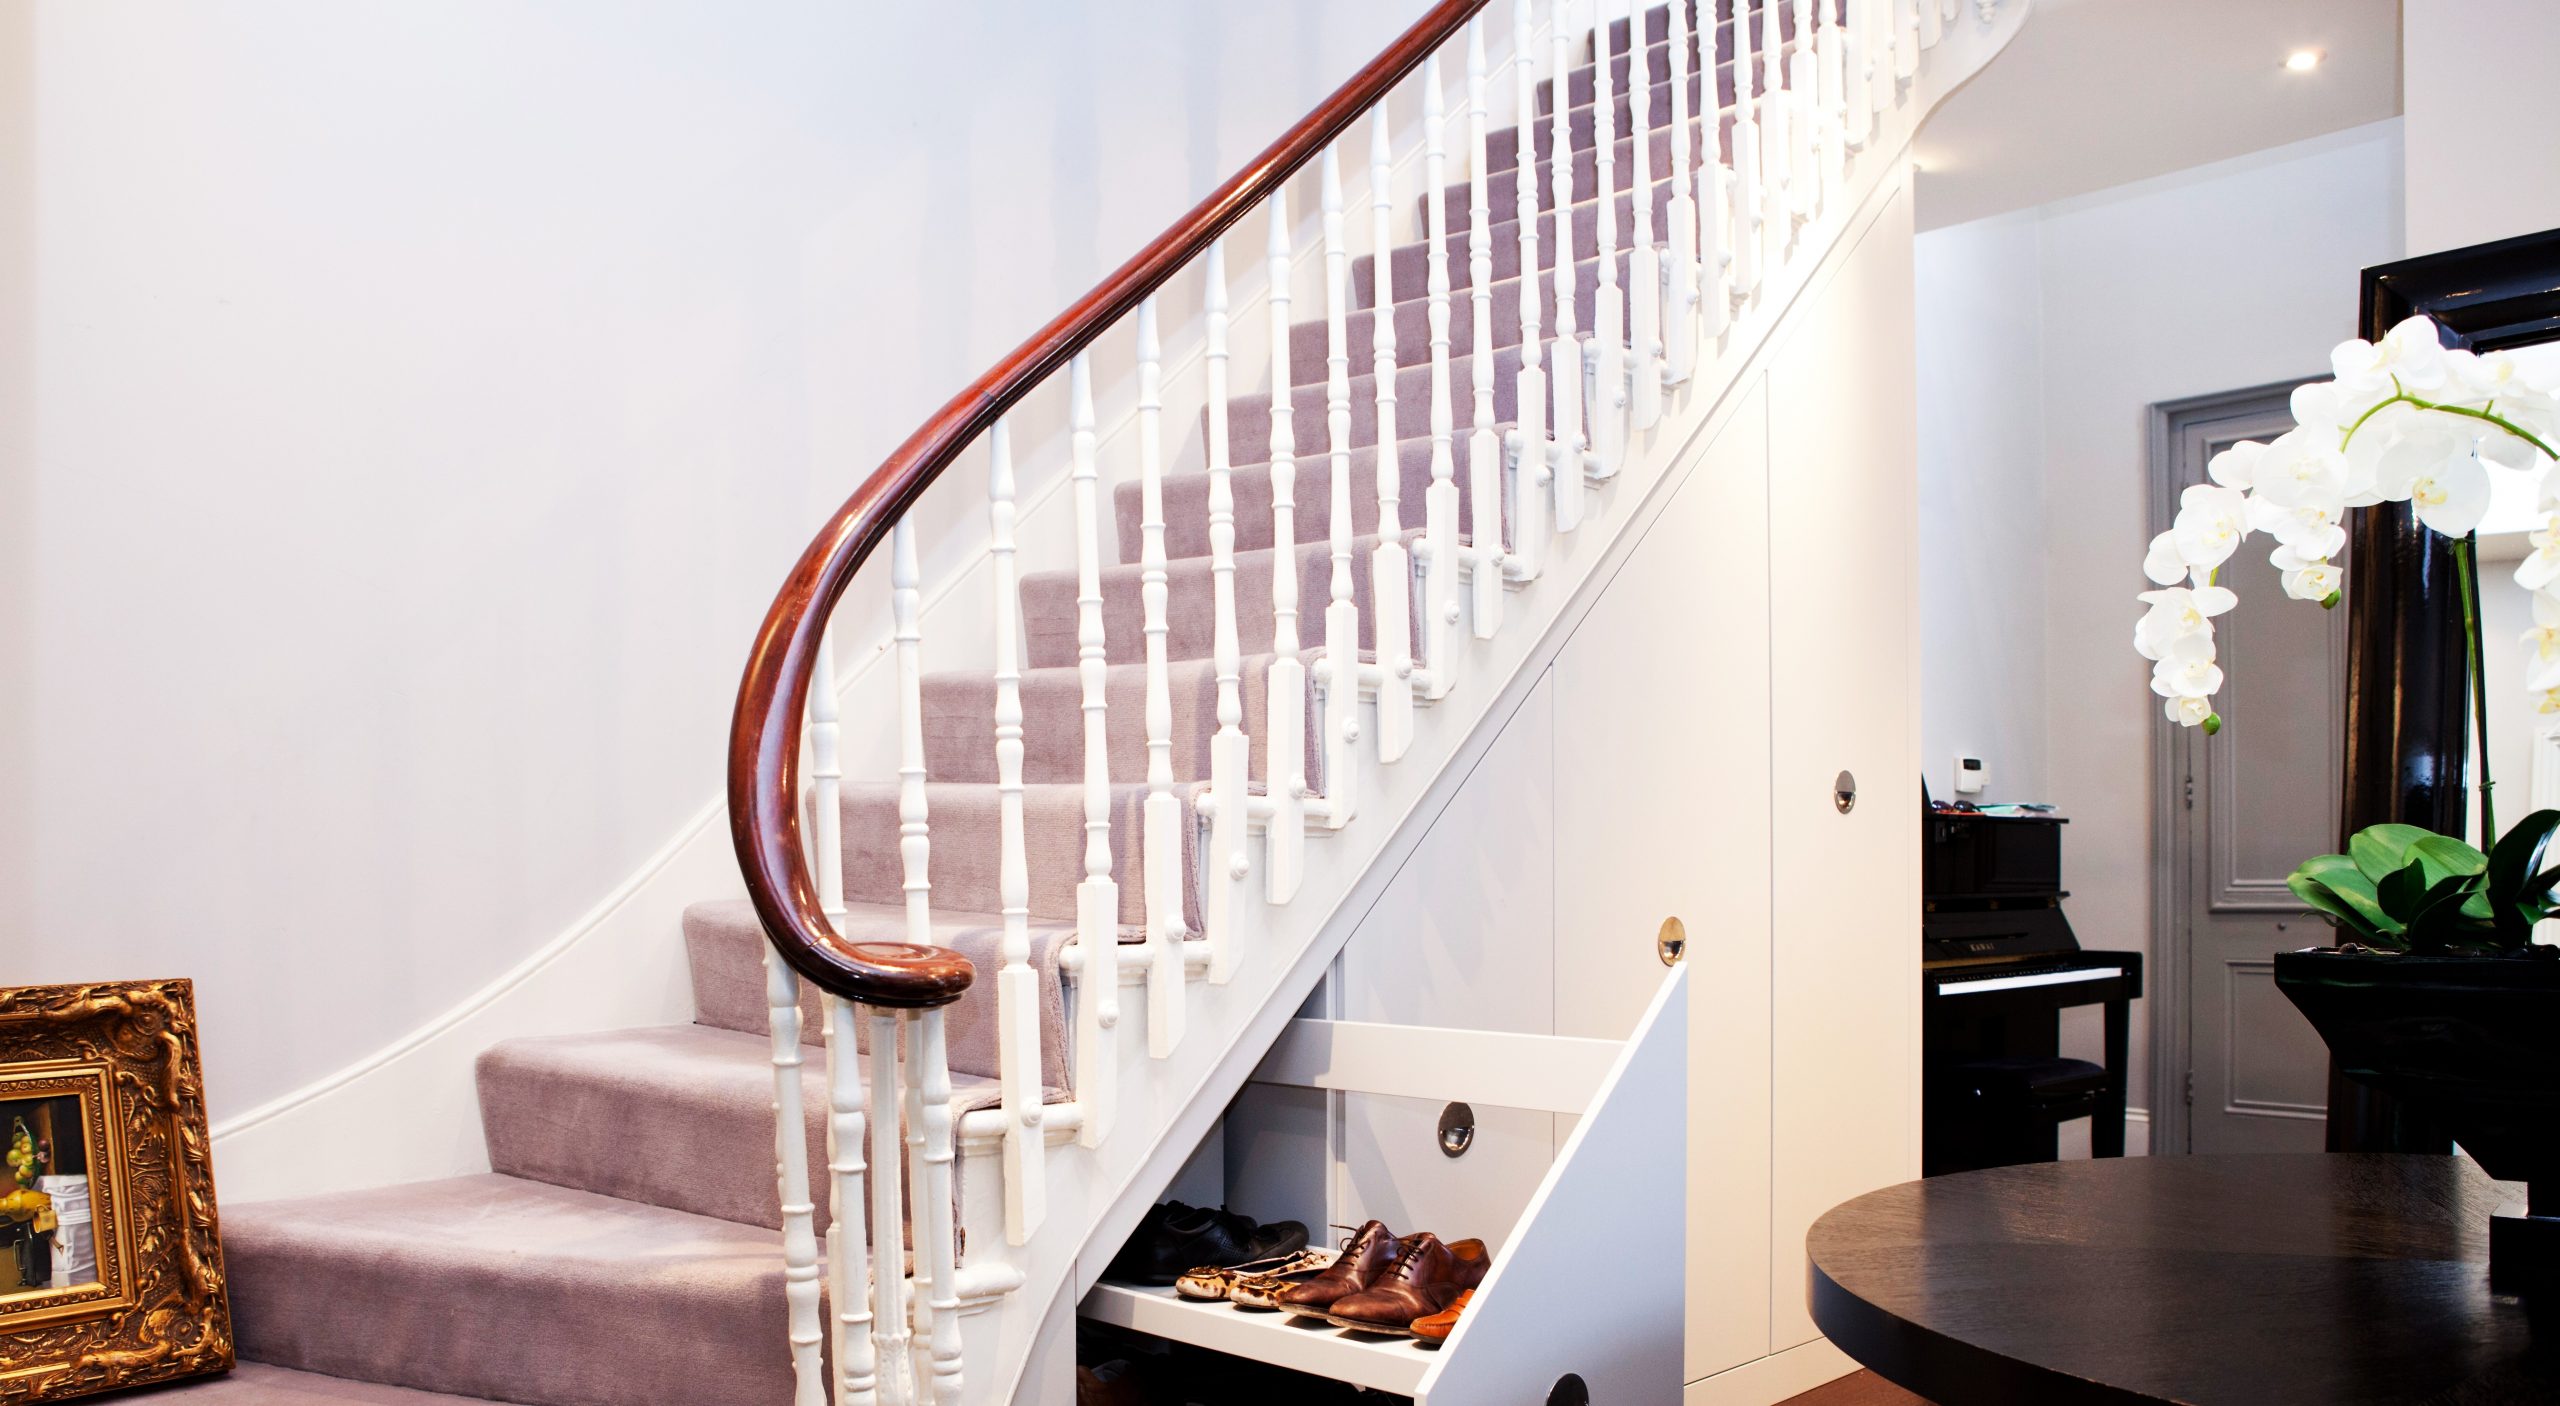 Using a Space below the Stair as a Shoe Rack is also one of the Good under Stair Storage Idea